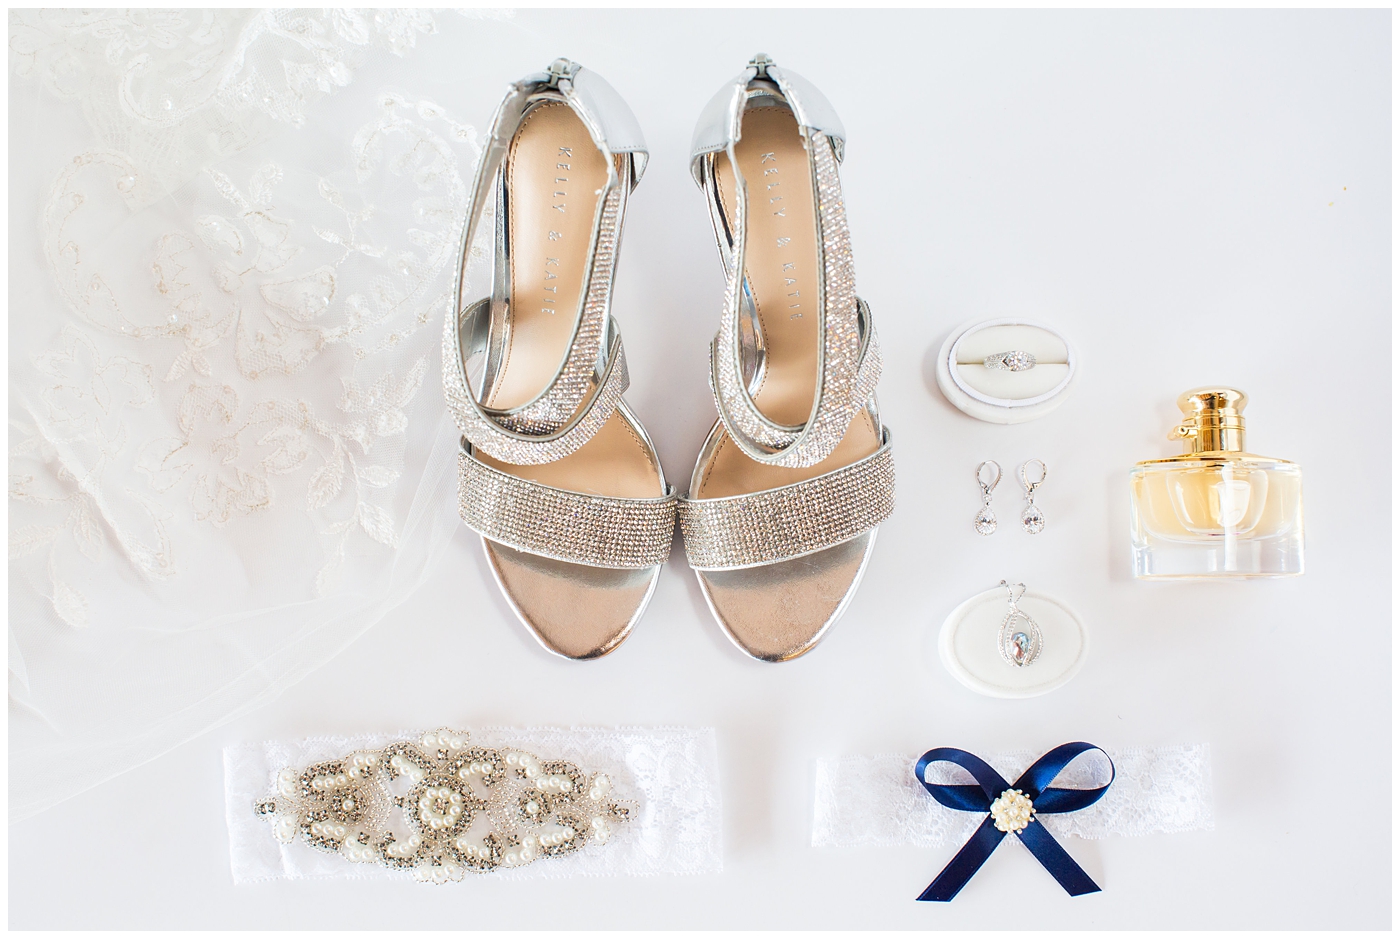 bride details on wedding day flat lay of jewelry, shoes, garter, rings, and perfume